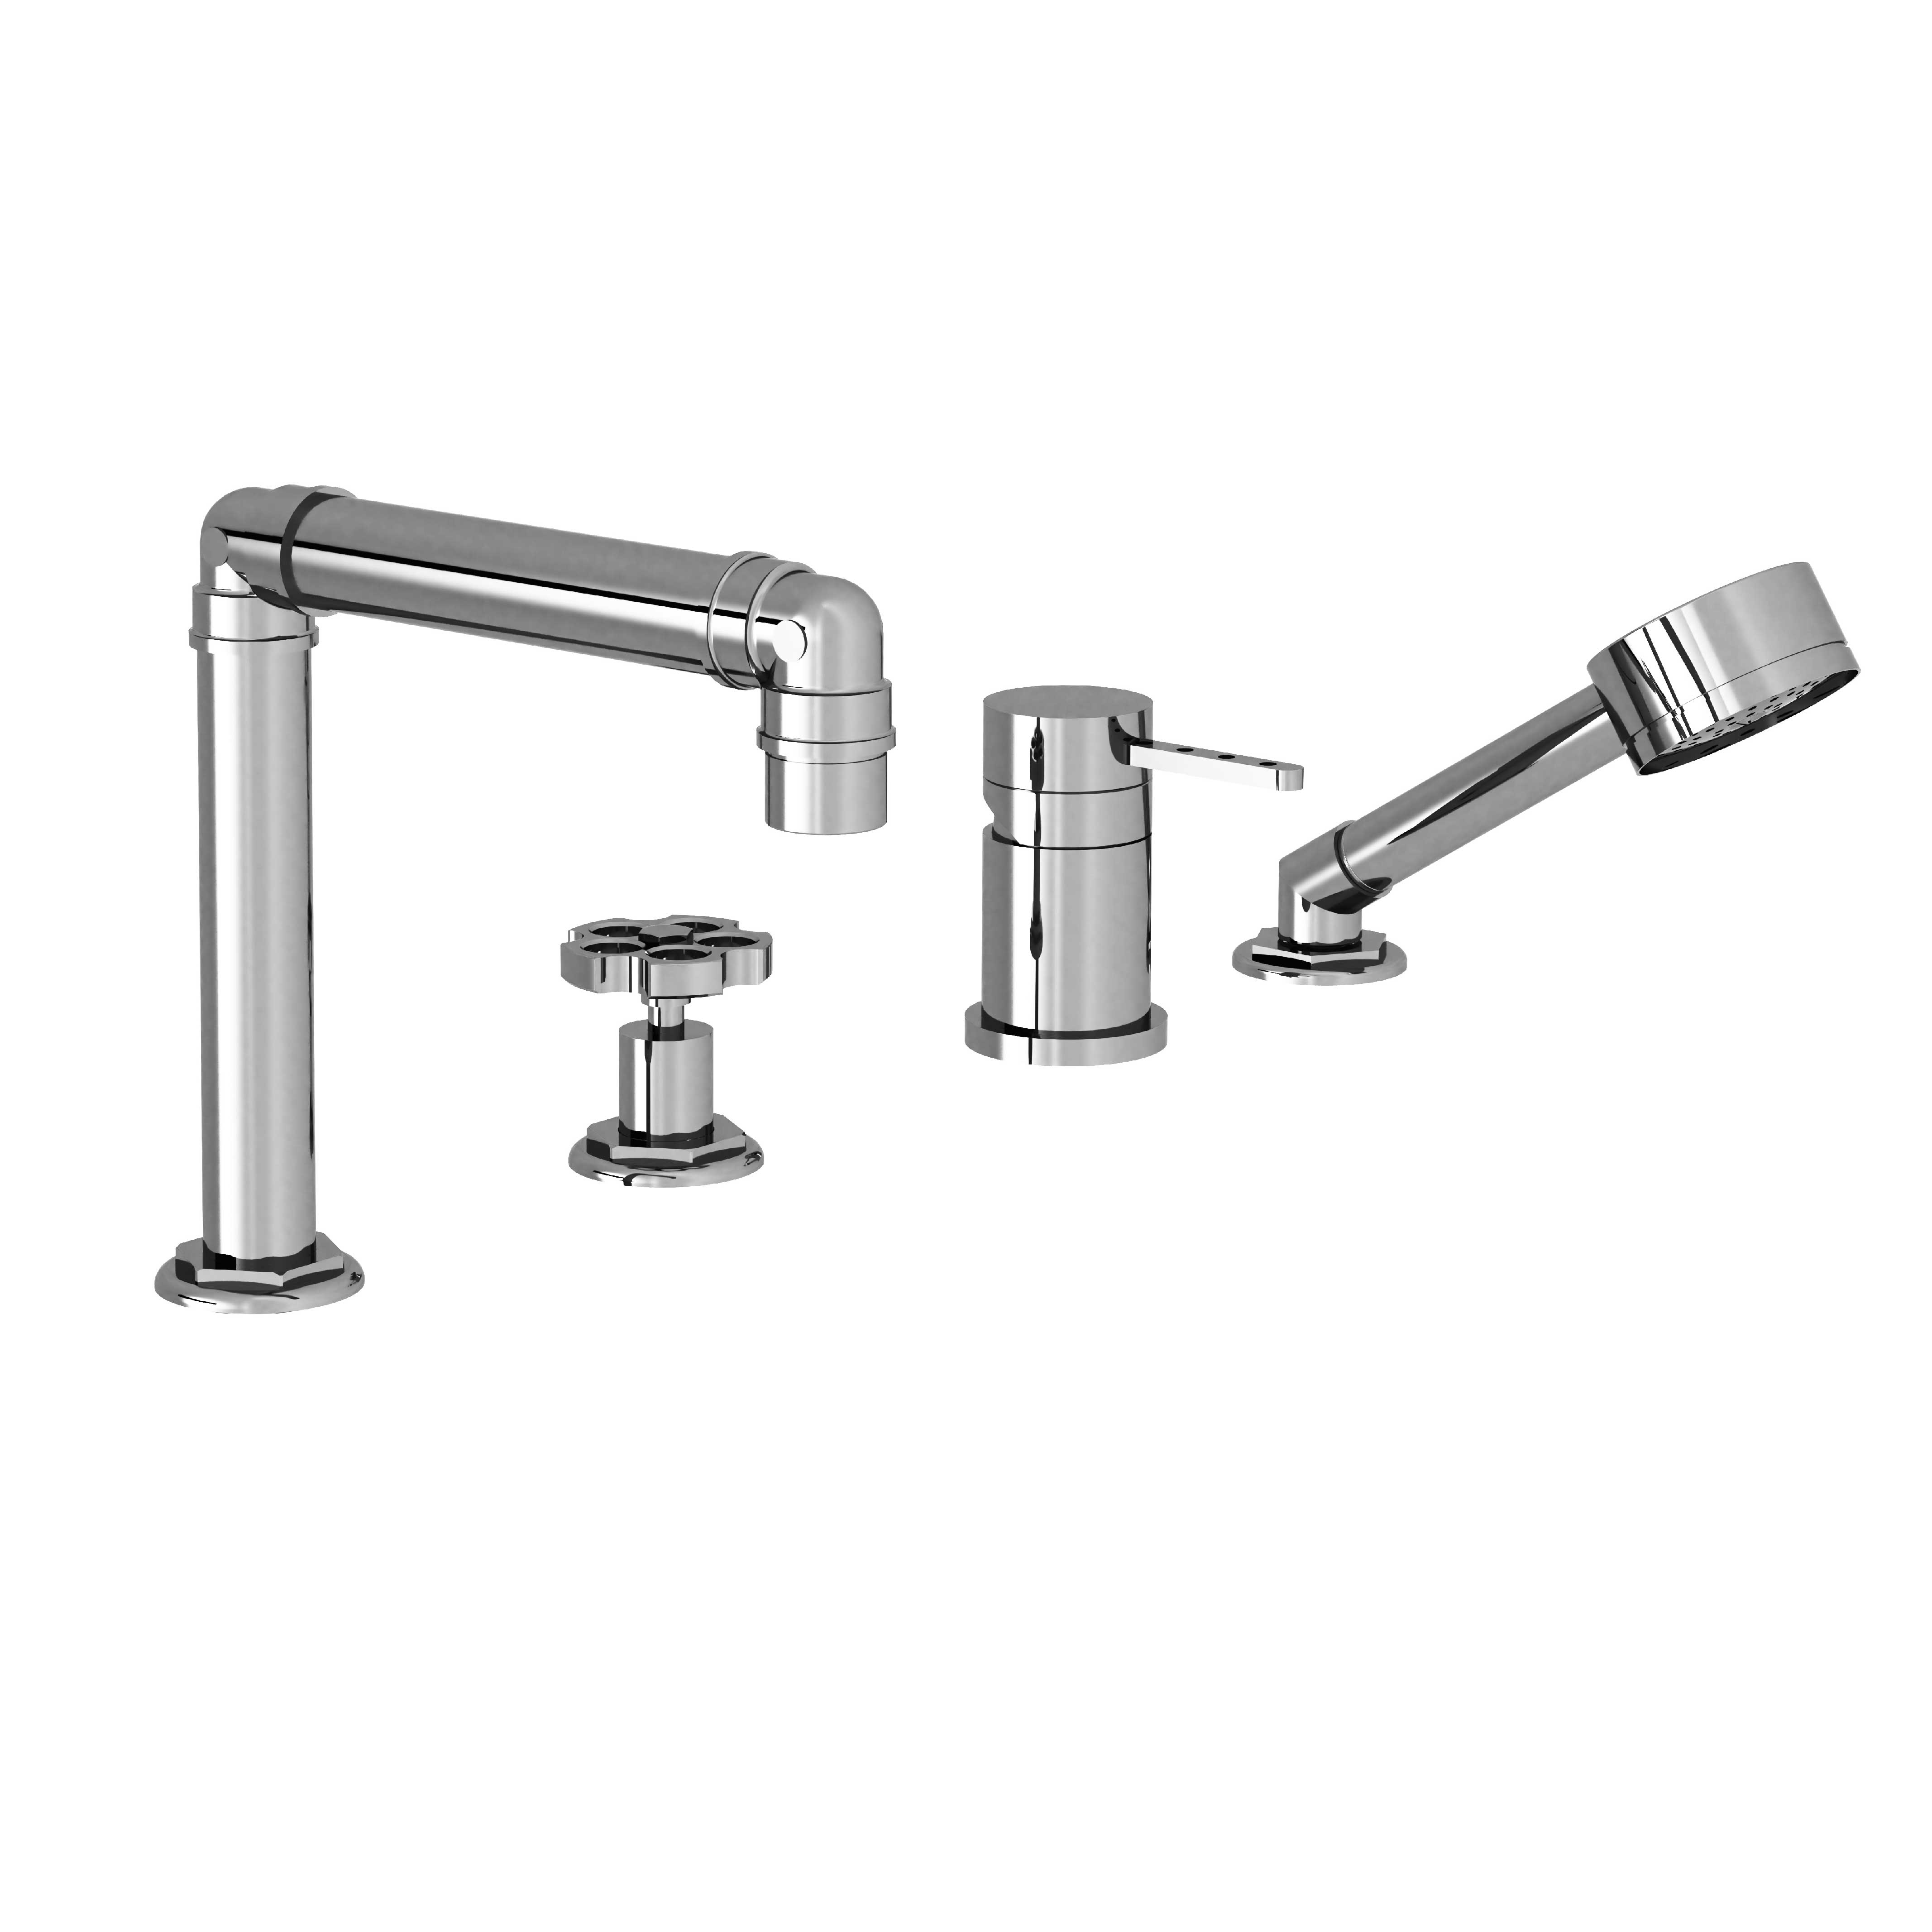 M81-3304M 4-hole single-lever bath and shower mixer